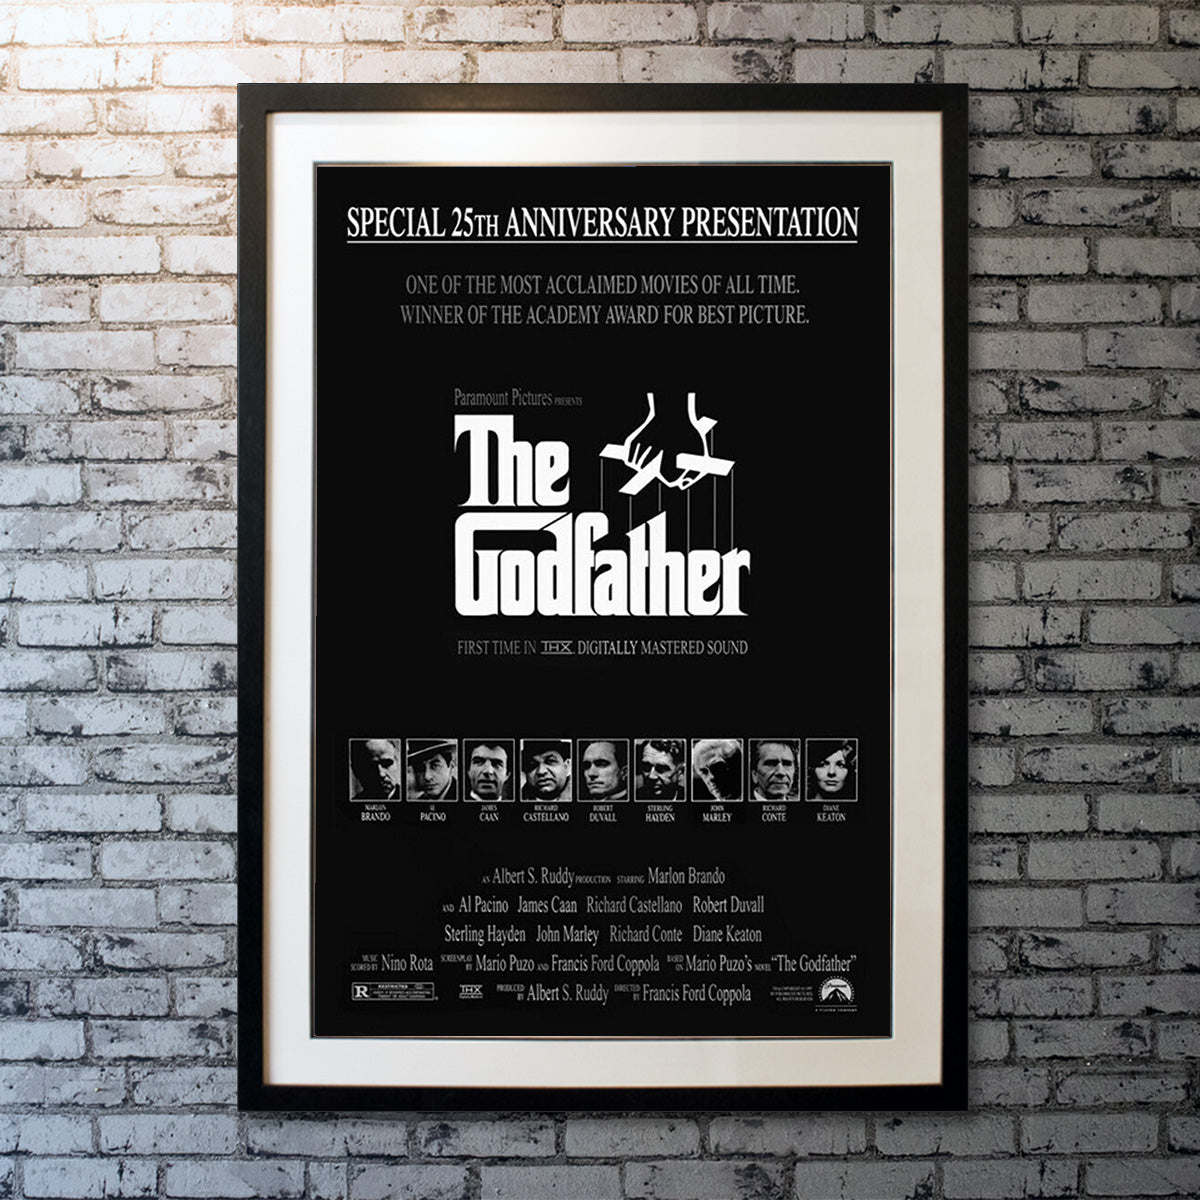 Original Movie Poster of Godfather, The (1997R)